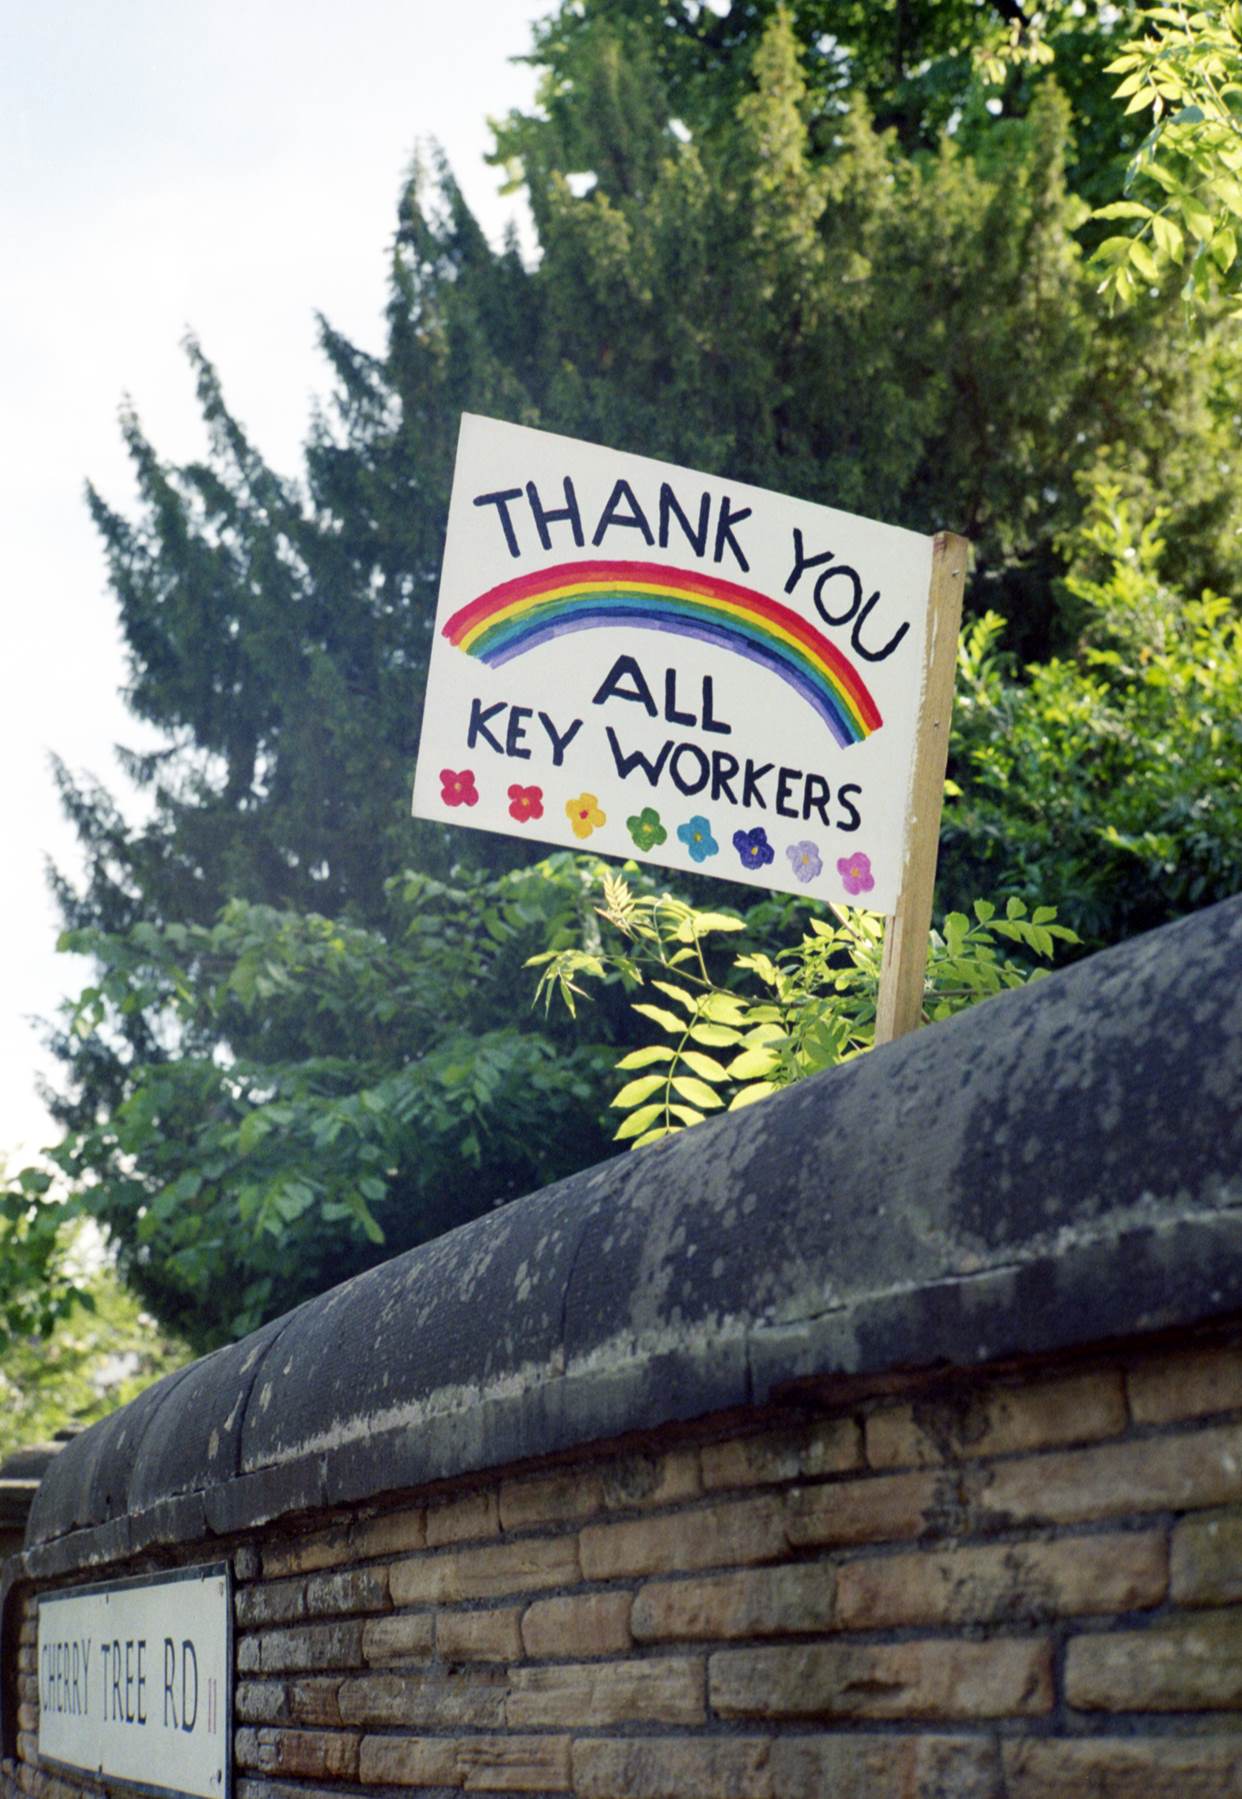 A hand drawn sign in someones garden thanking keyworkers 